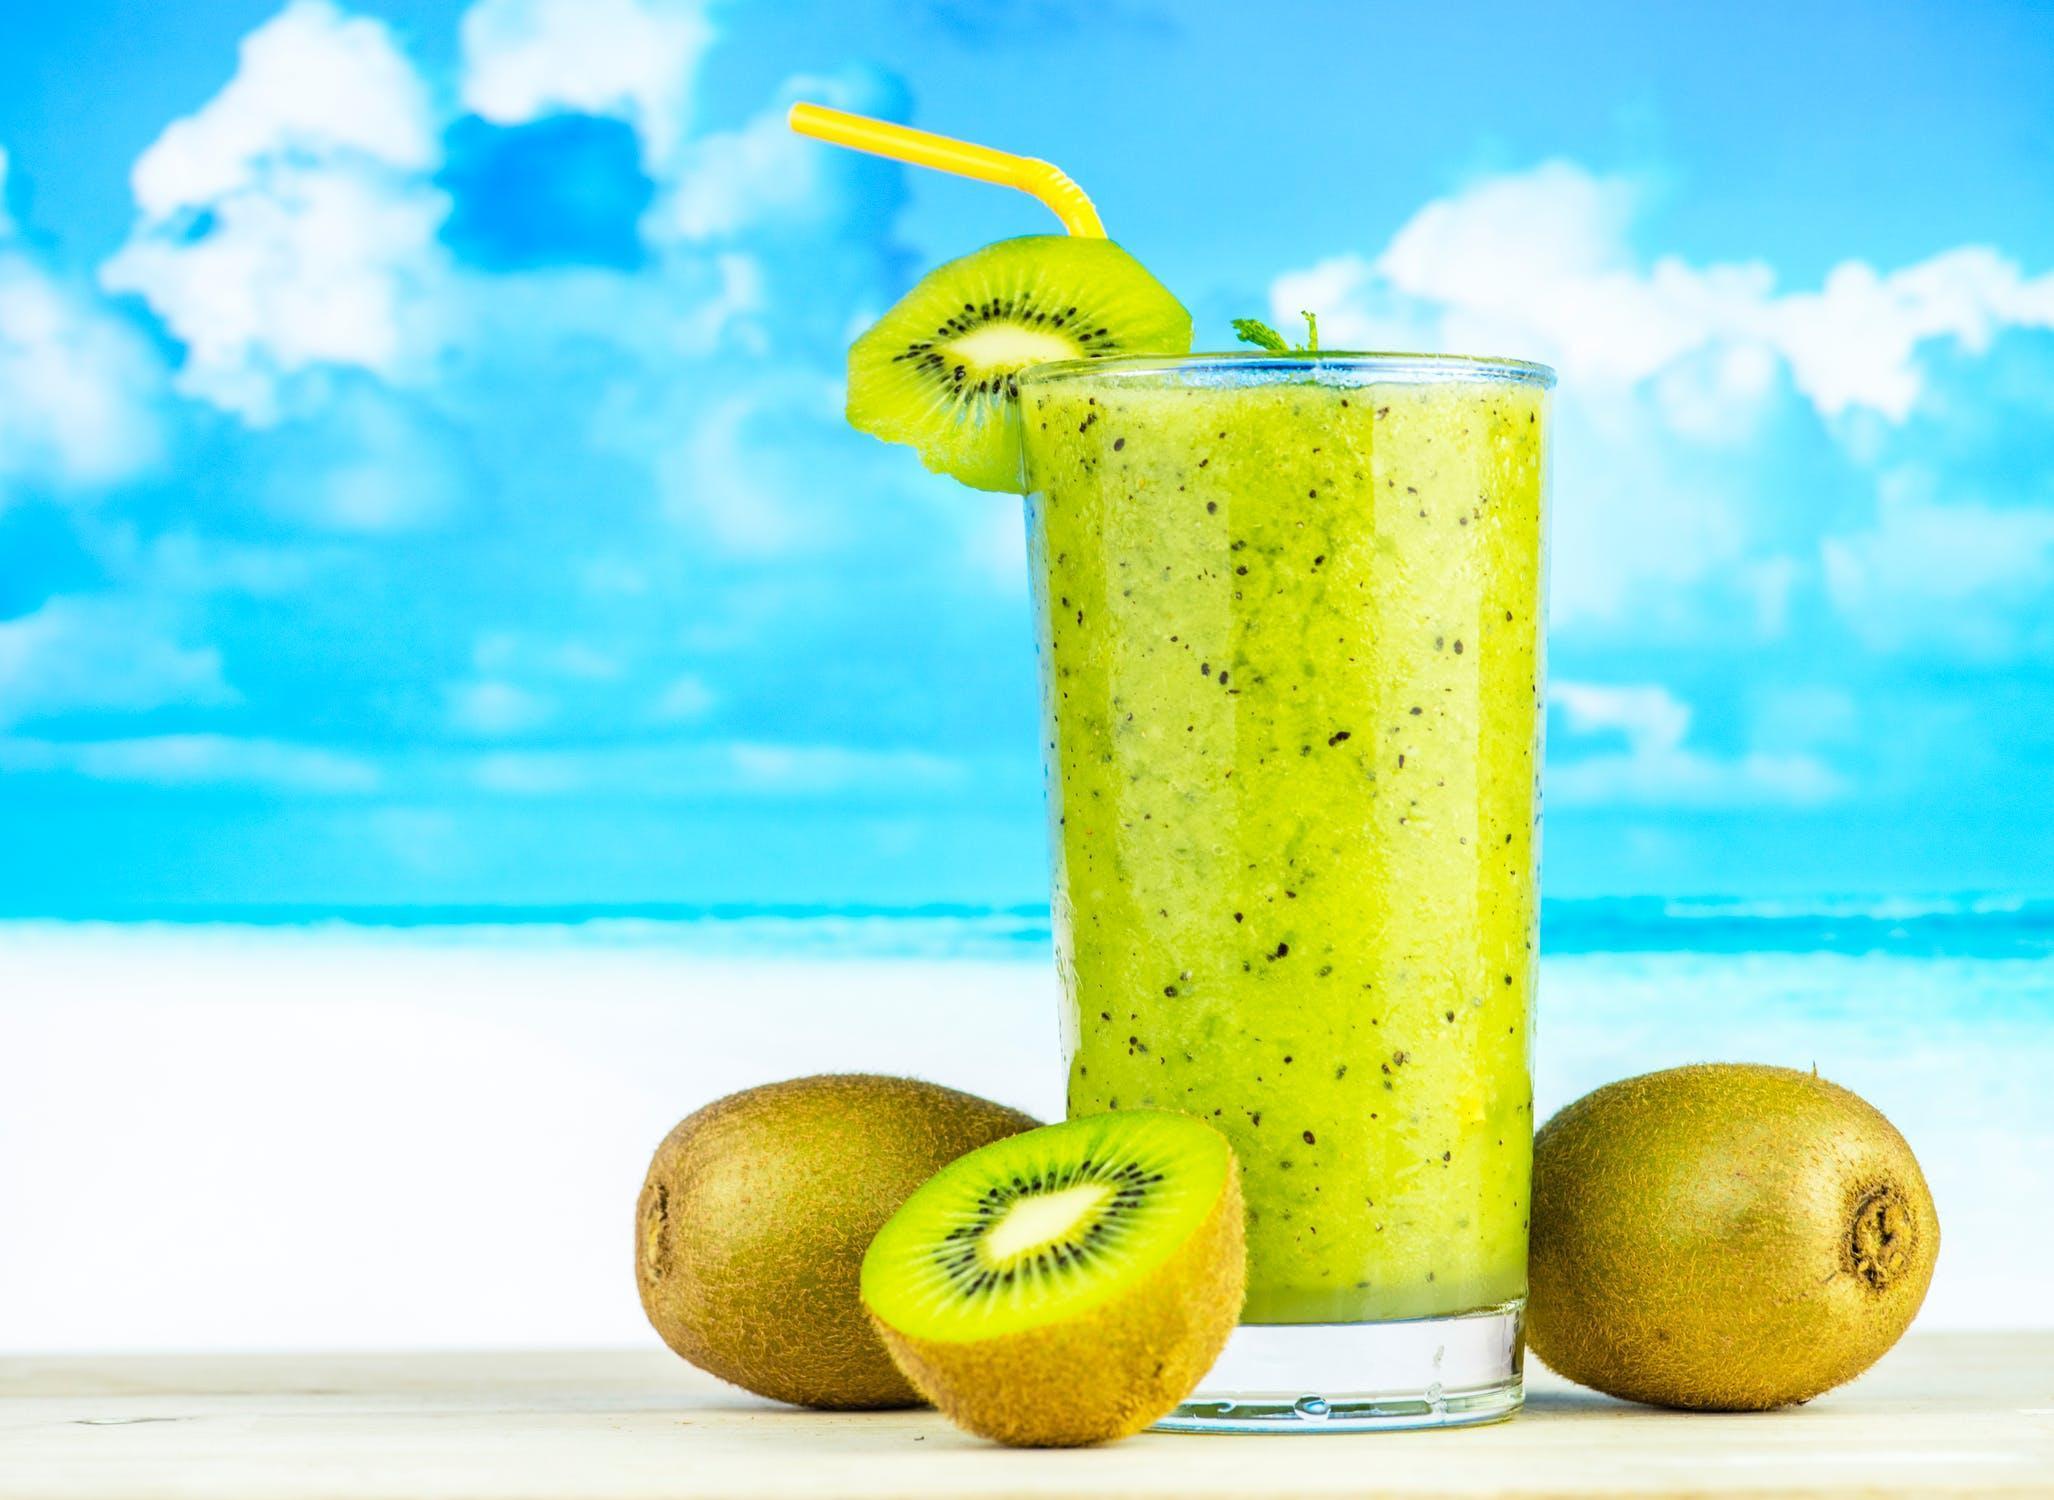 Juice or Smoothie: What's the Difference?